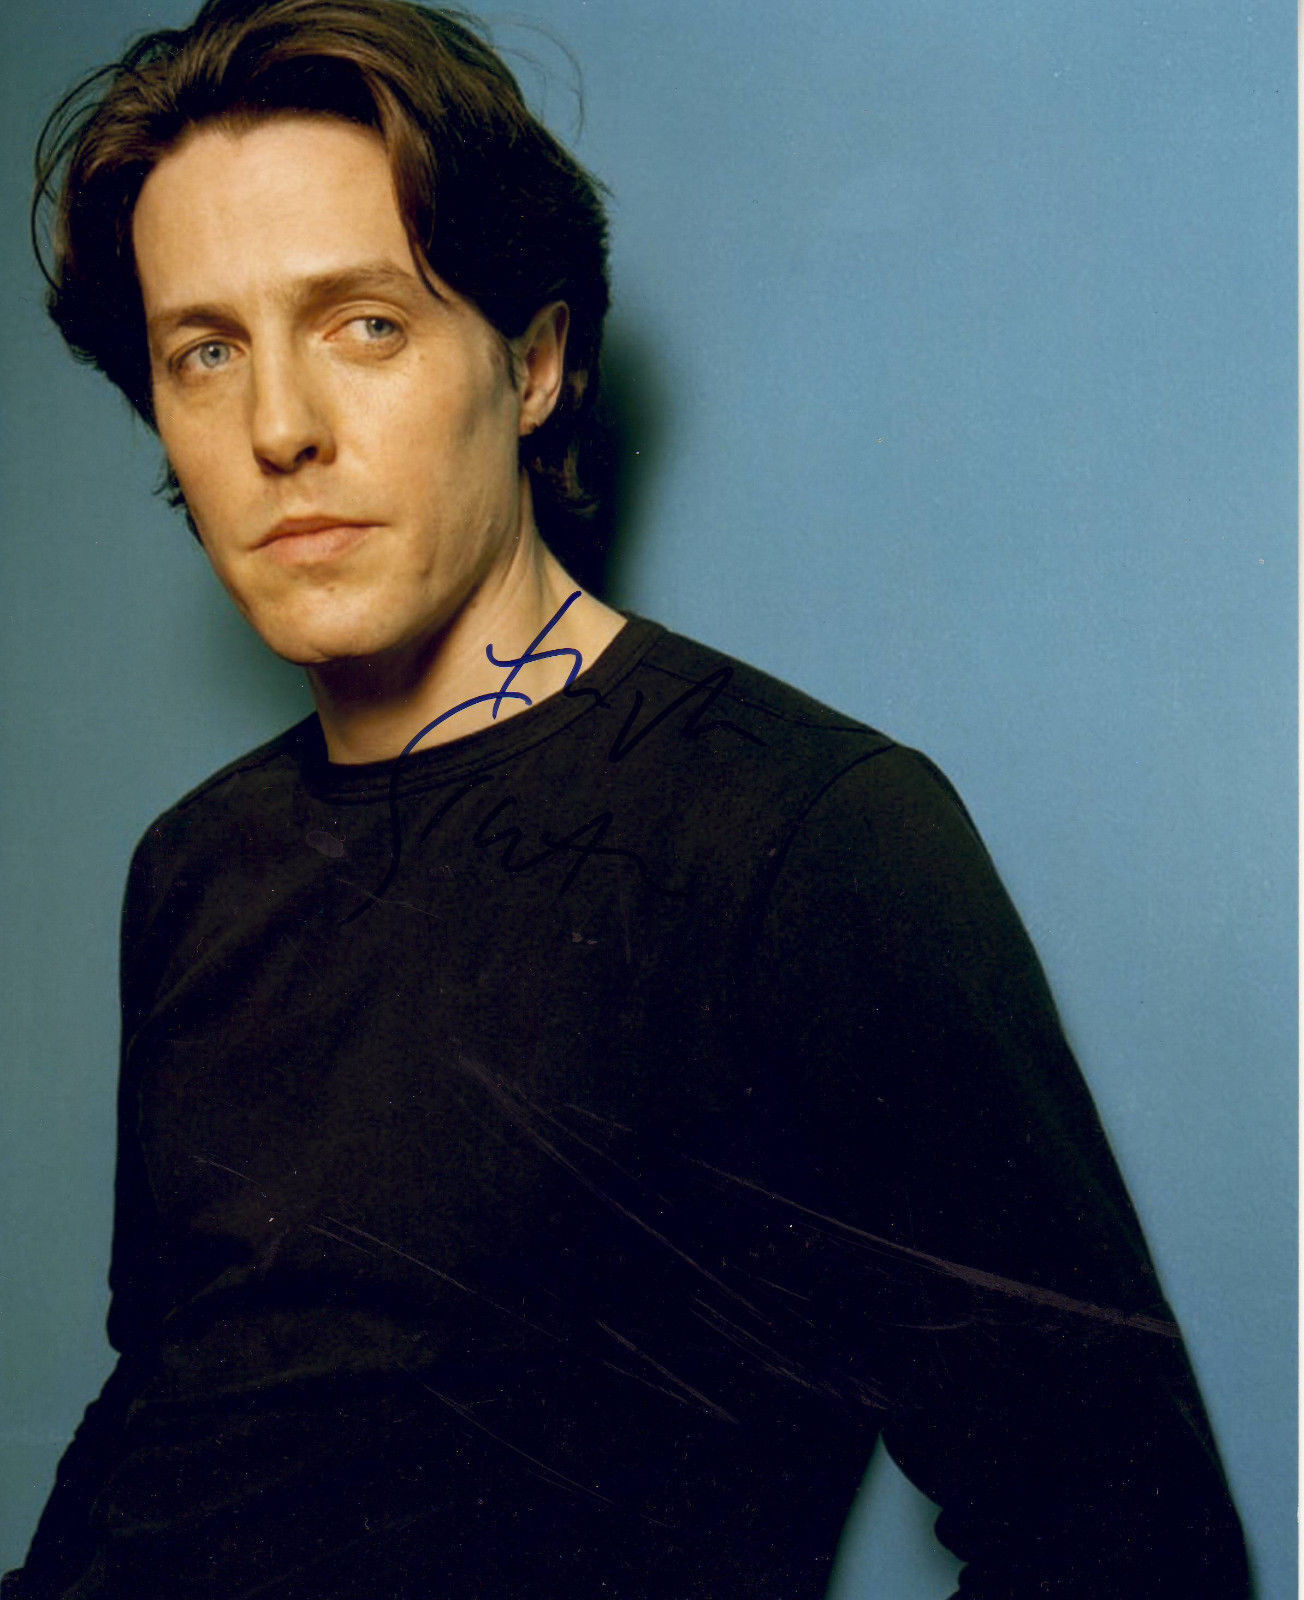 HUGH GRANT AUTOGRAPH SIGNED PP Photo Poster painting POSTER